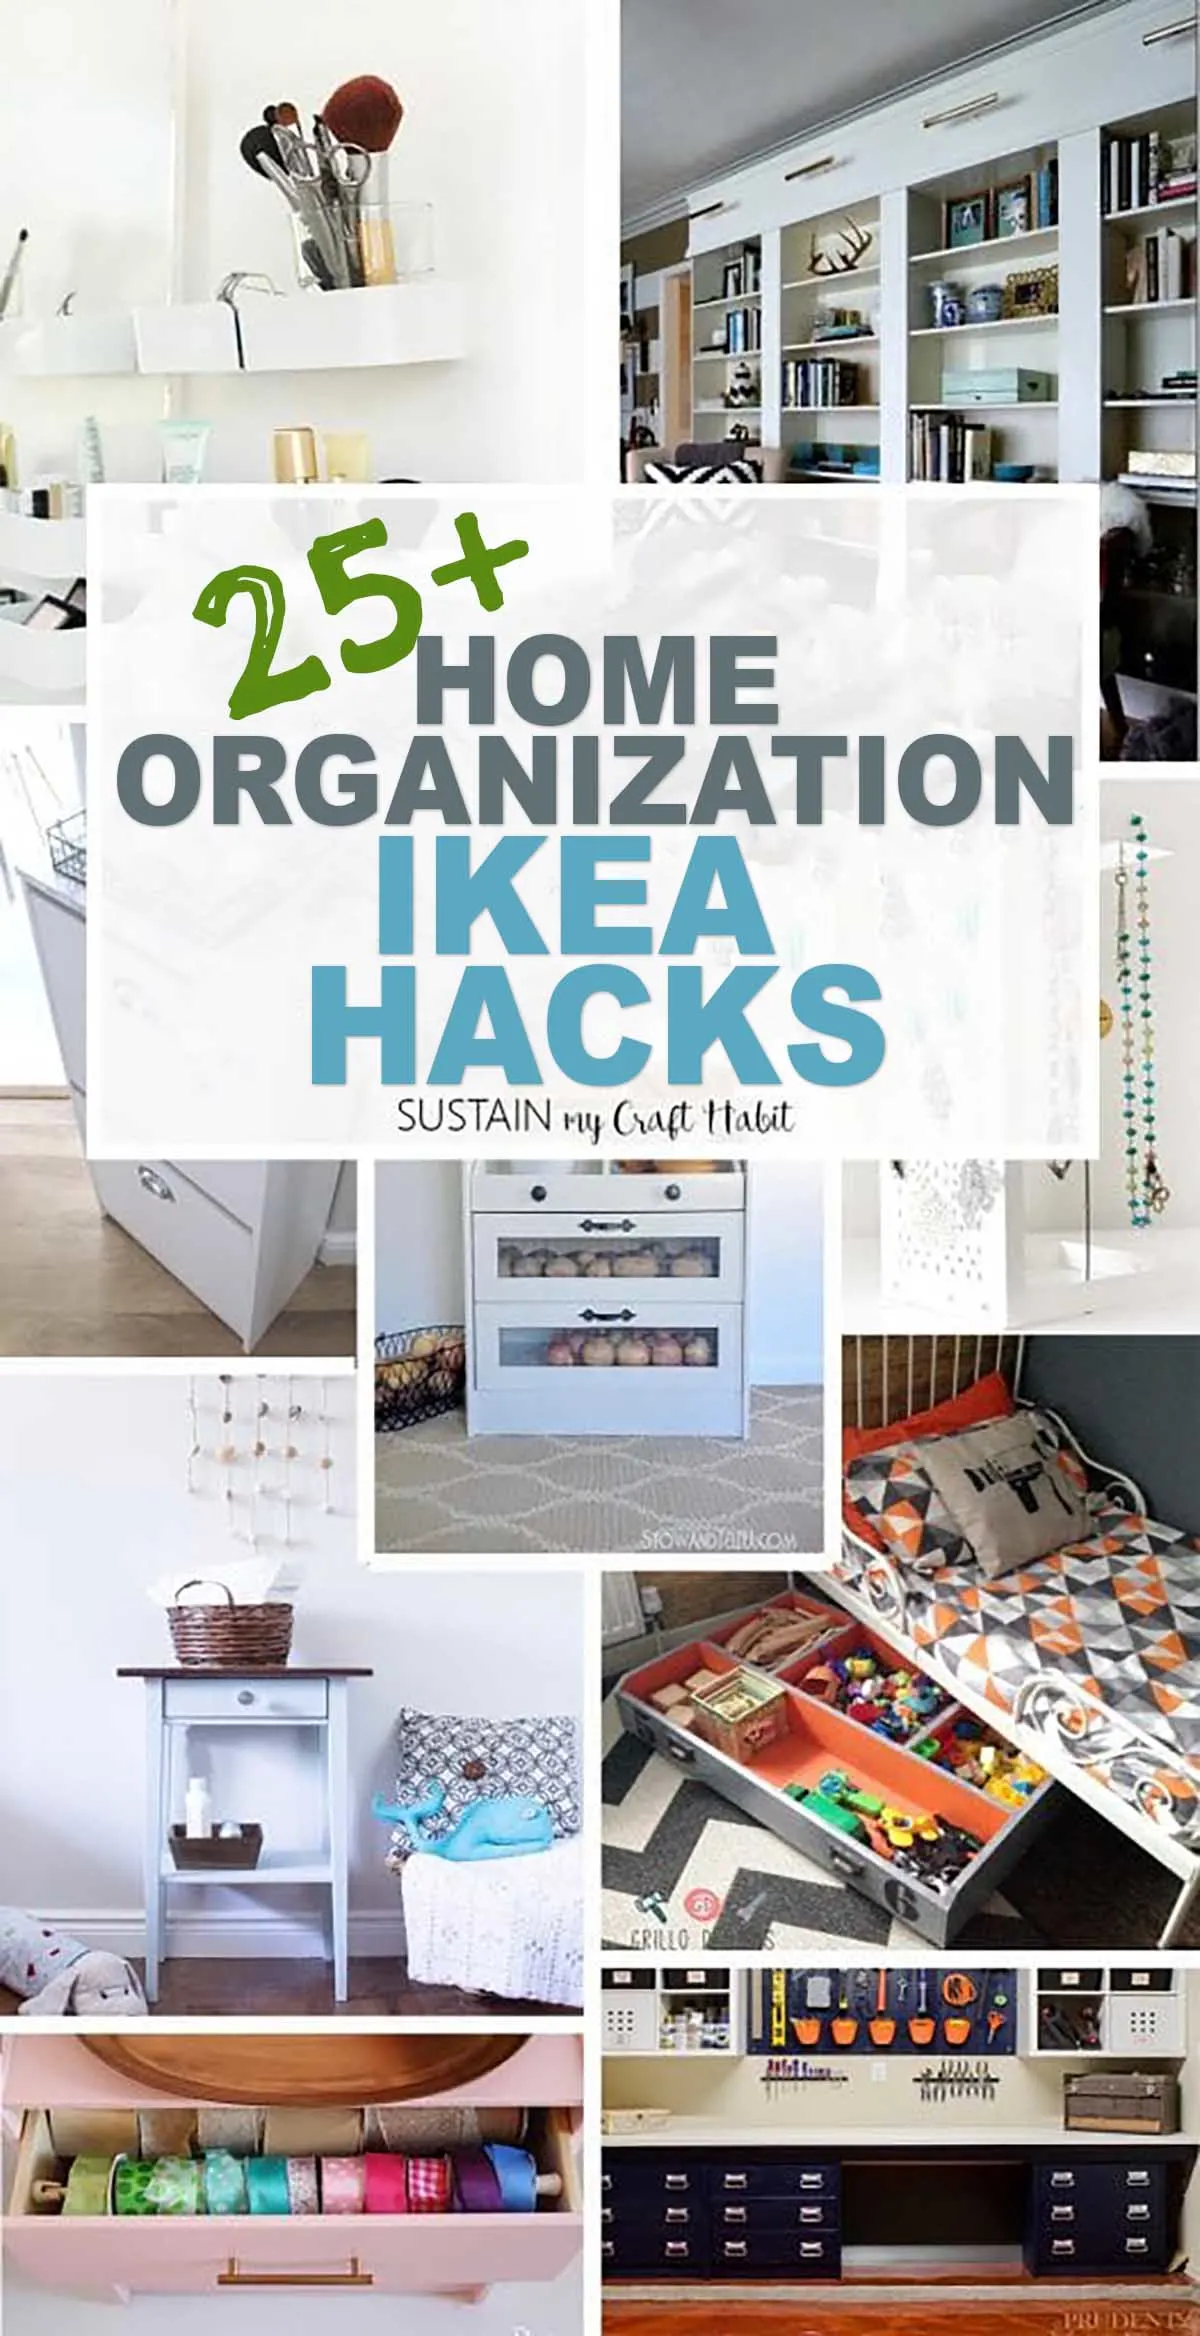 Collage of images IKEA Home Organtion Hack Ideas